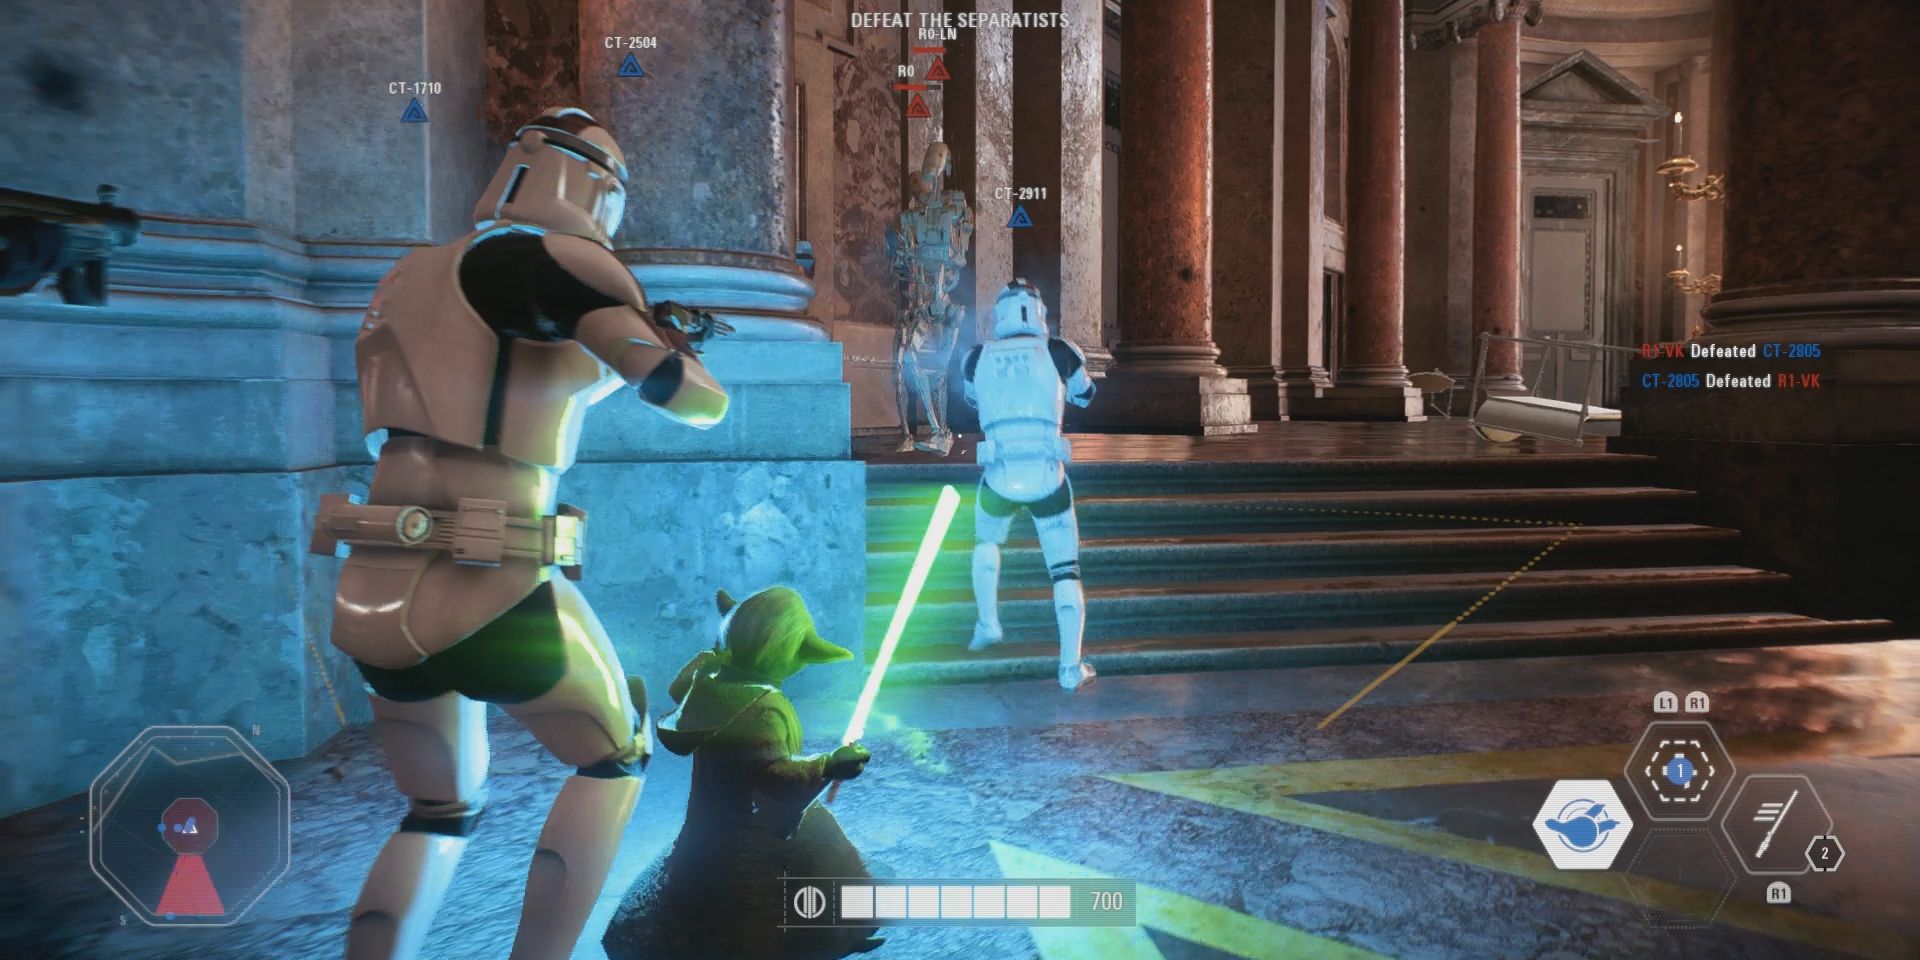 Yoda holding his lightsaber marches alsong side Clone Troopers in Star Wars Battlefront II